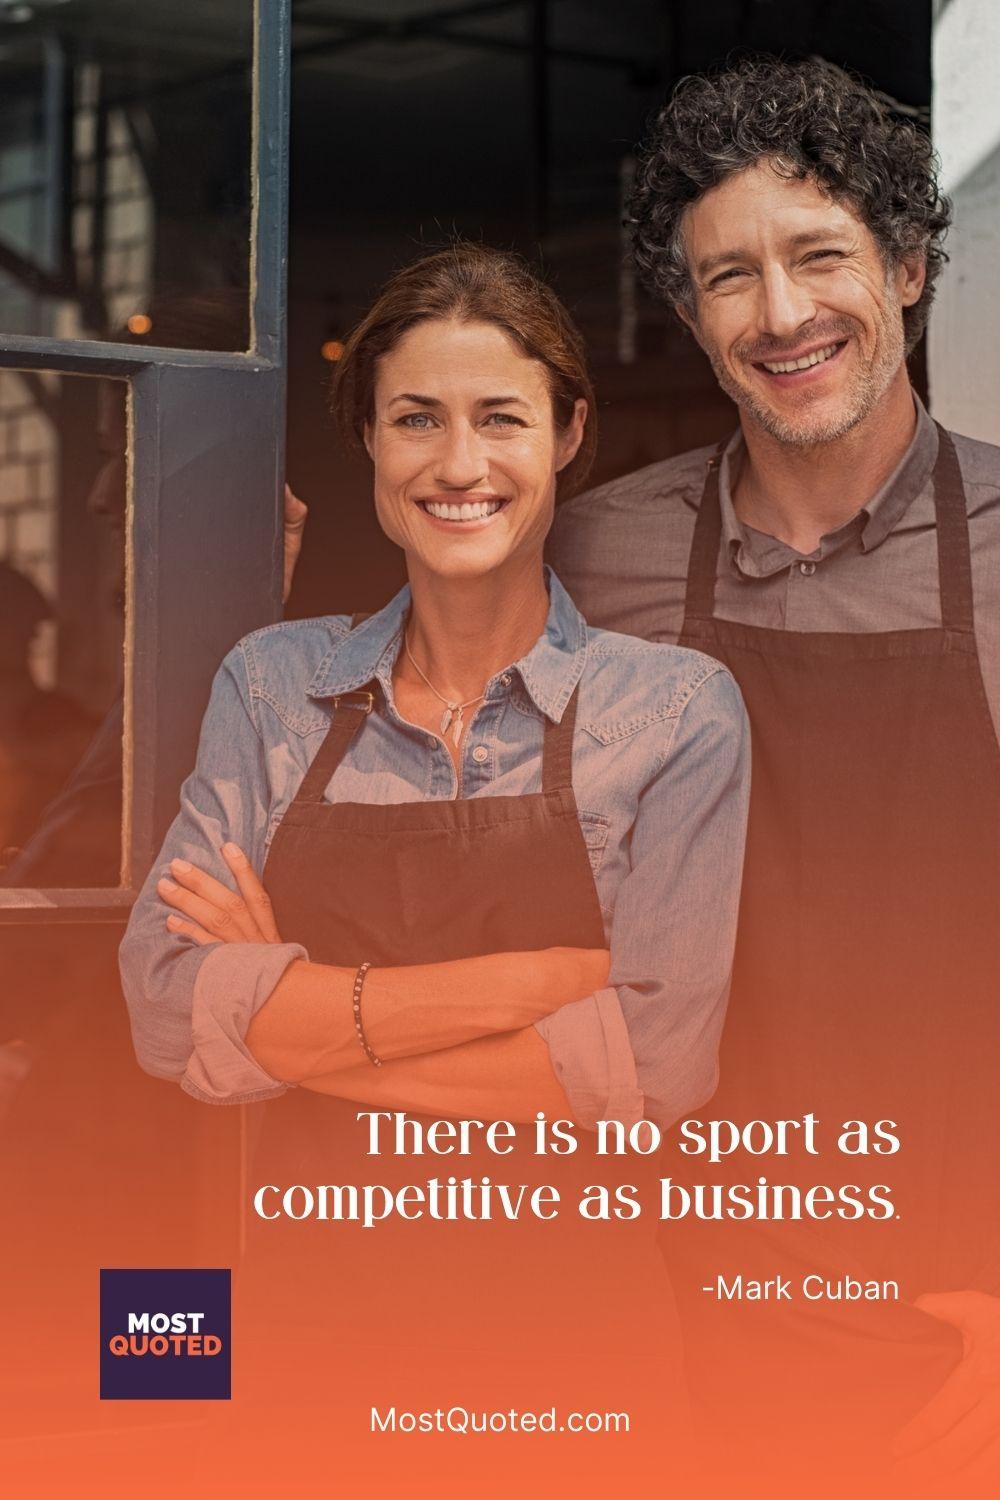 There is no sport as competitive as business. - Mark Cuban